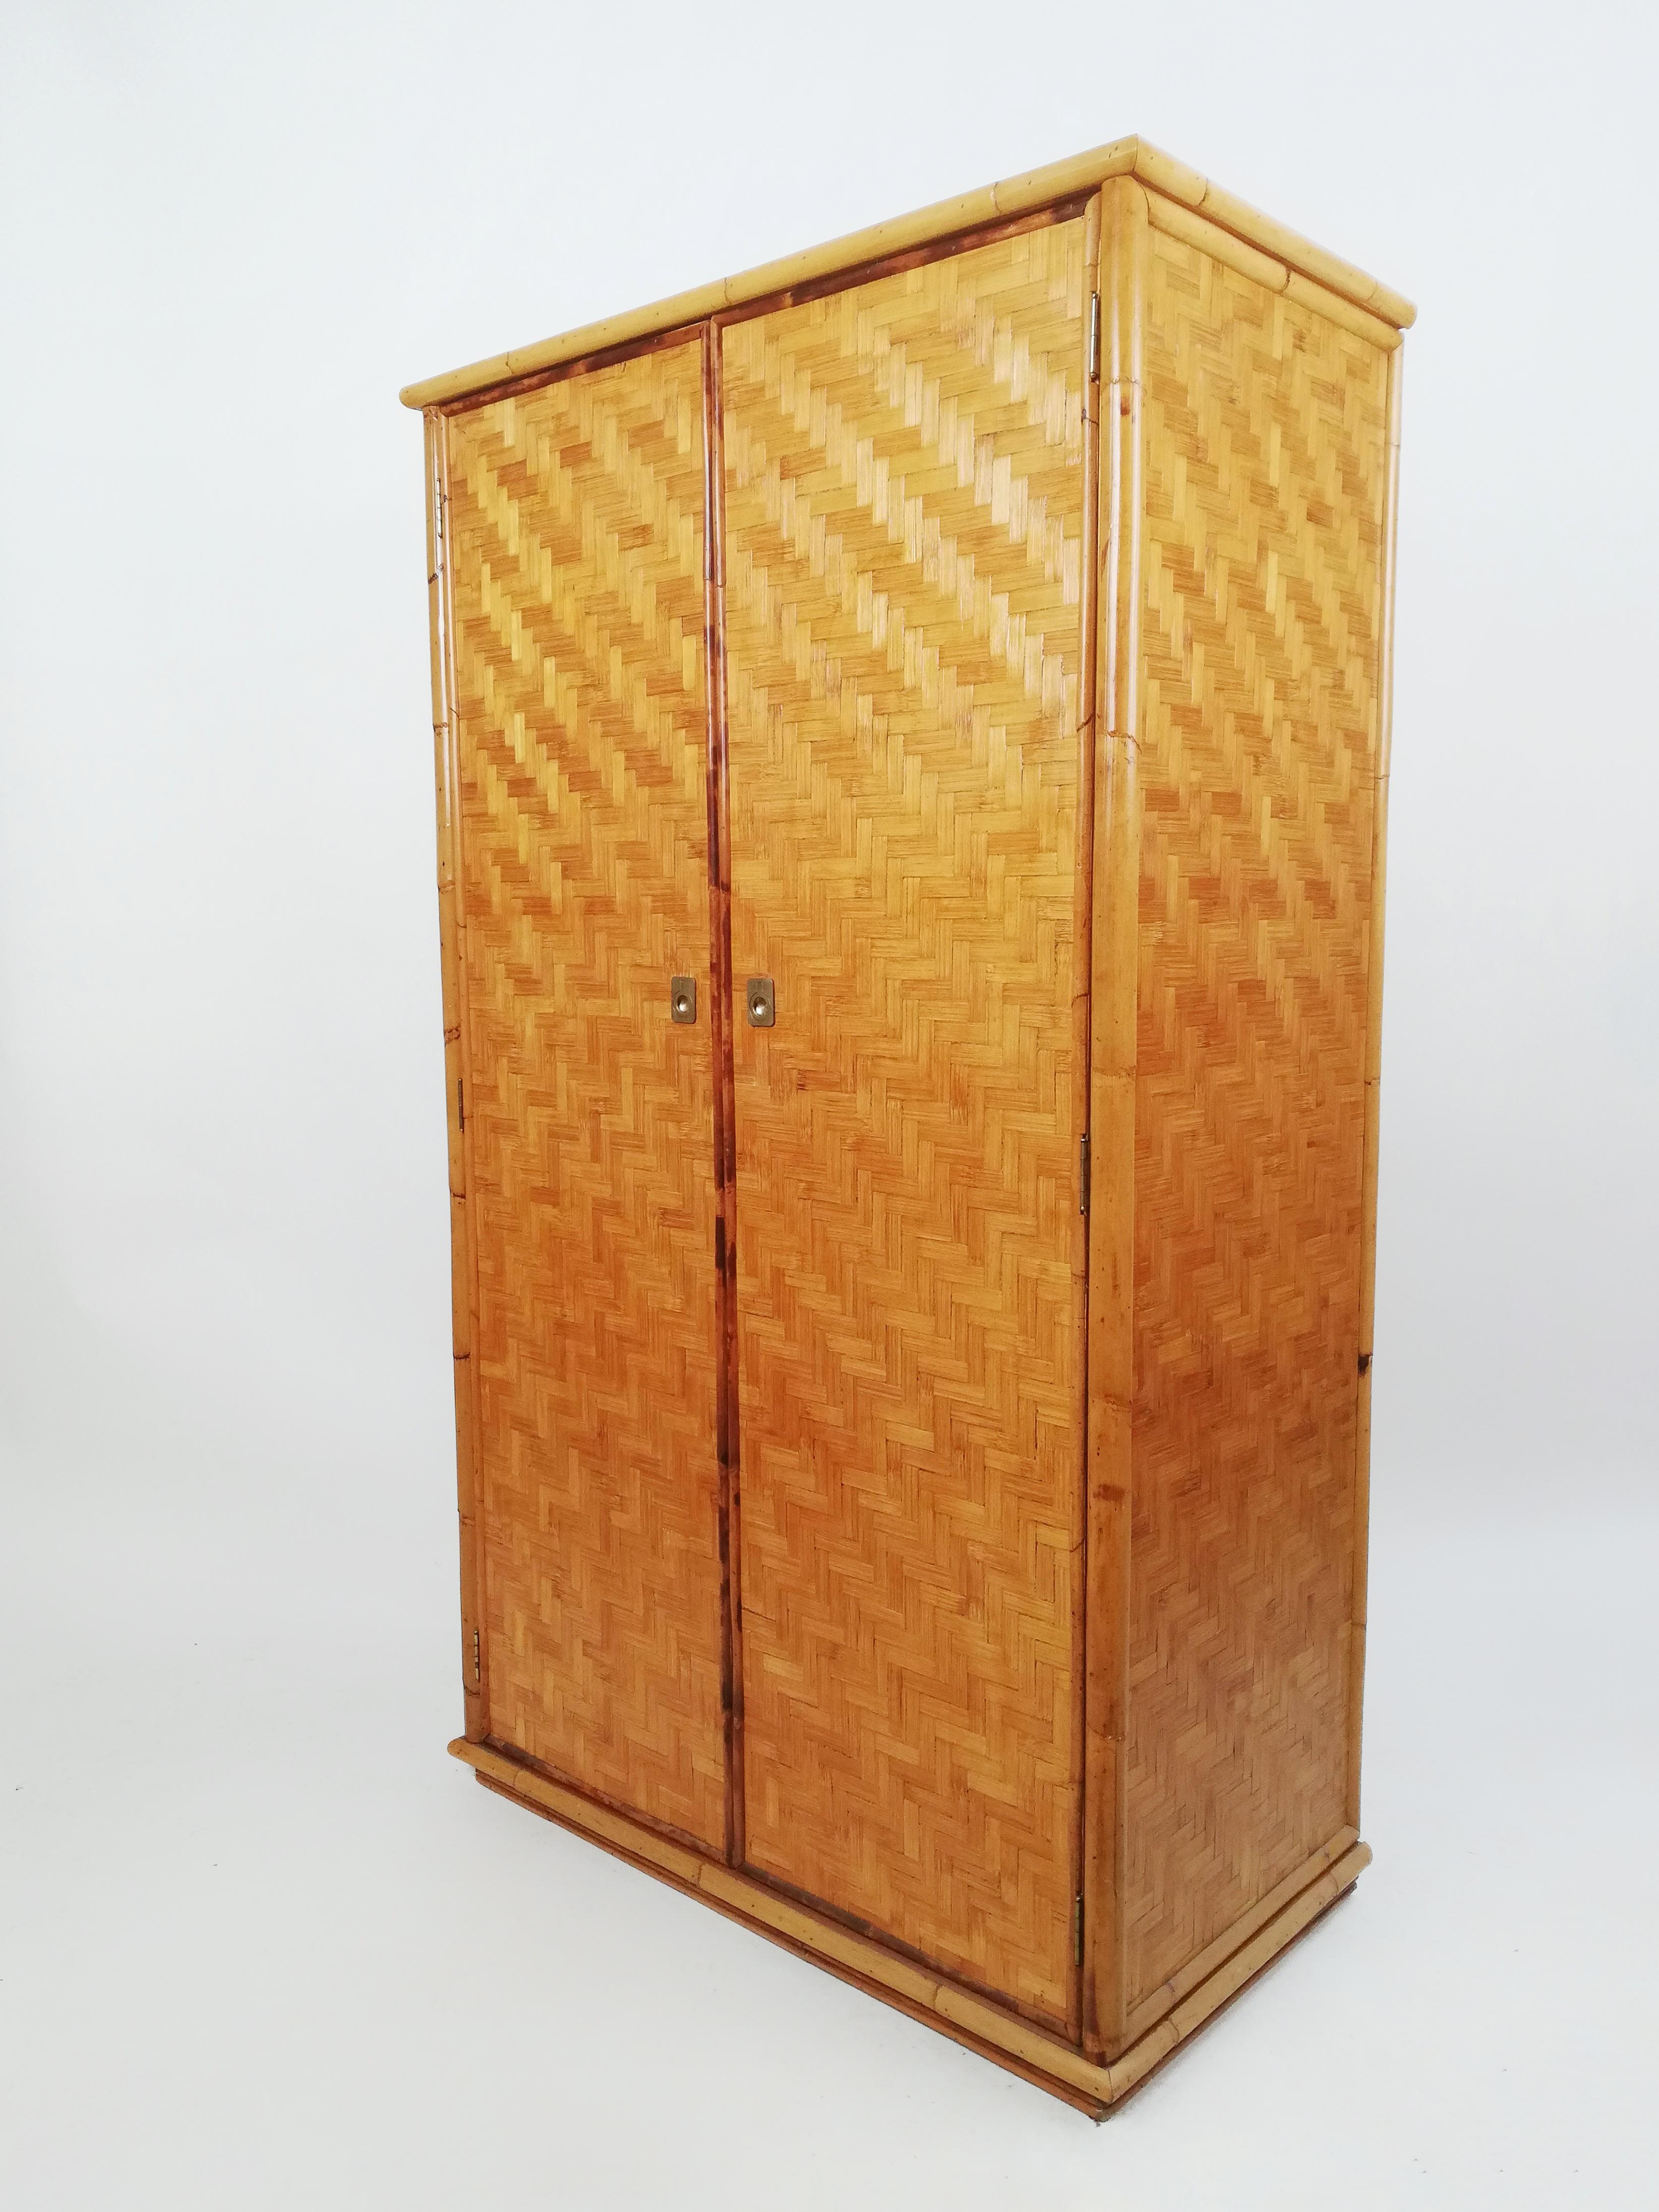 Vintage 2 Door Wardrobe in Wicker Cane, Rattan and Bamboo by Dal Vera, 1970s For Sale 5